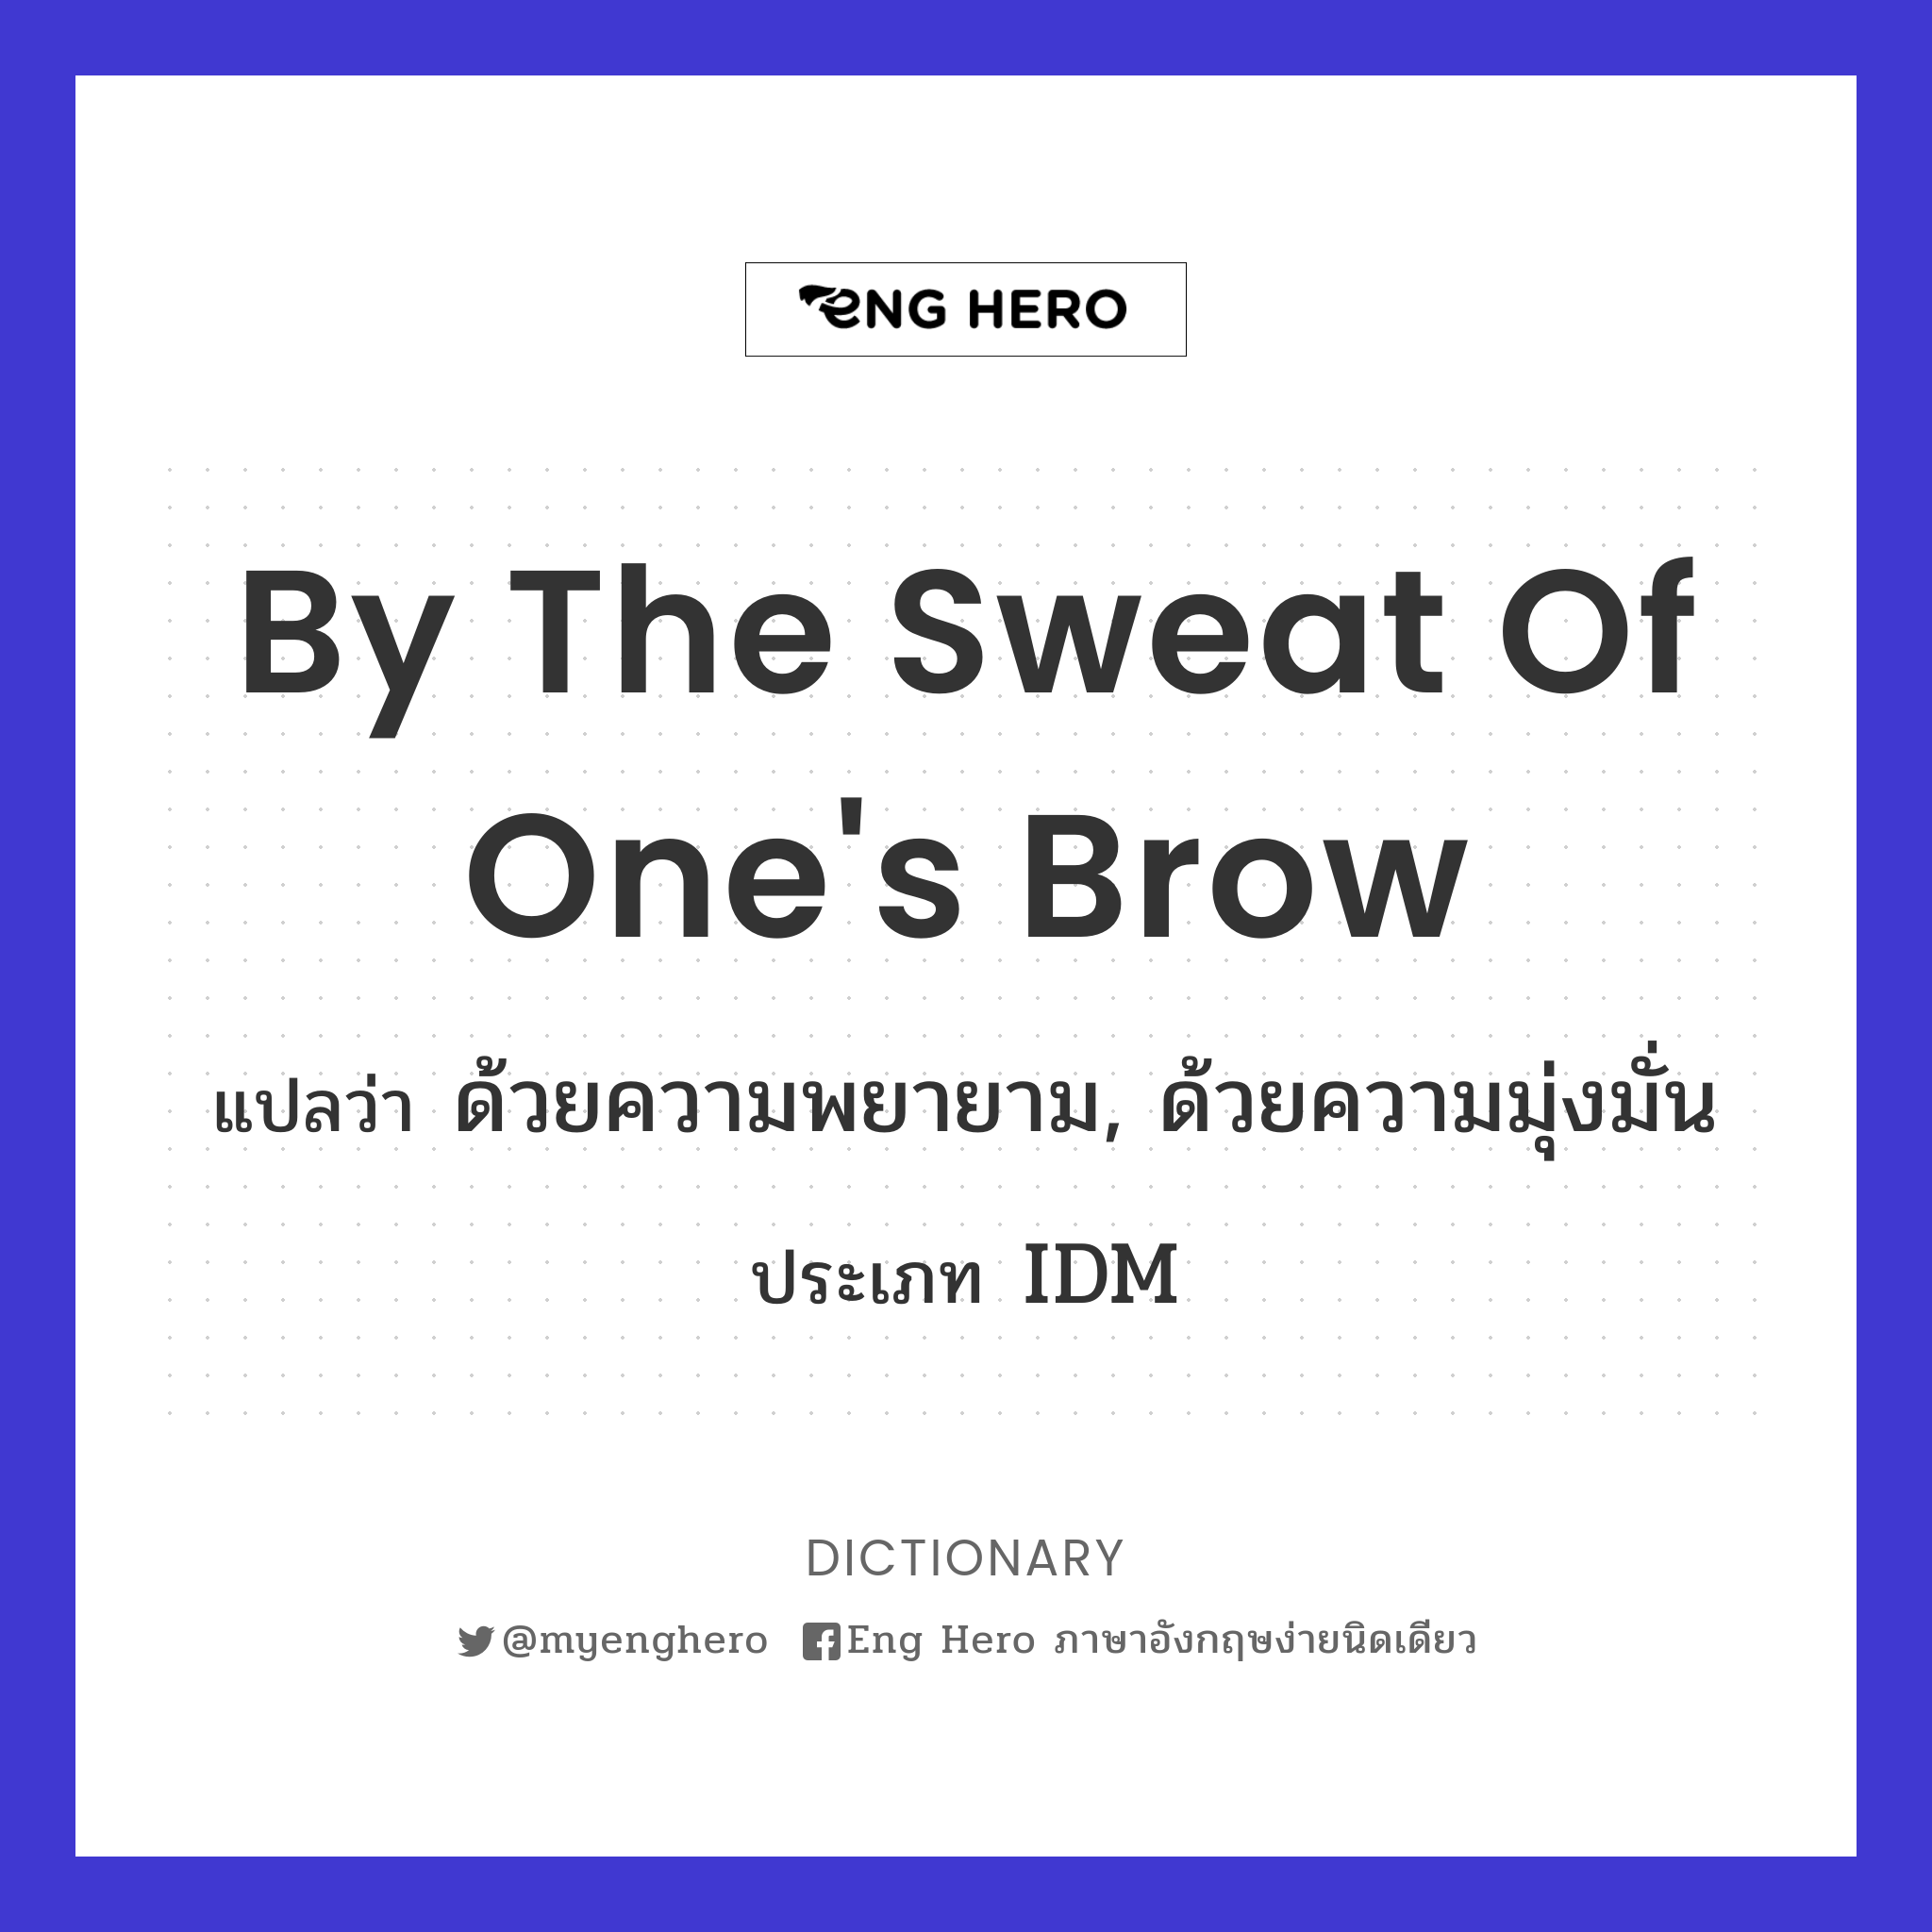 by the sweat of one's brow